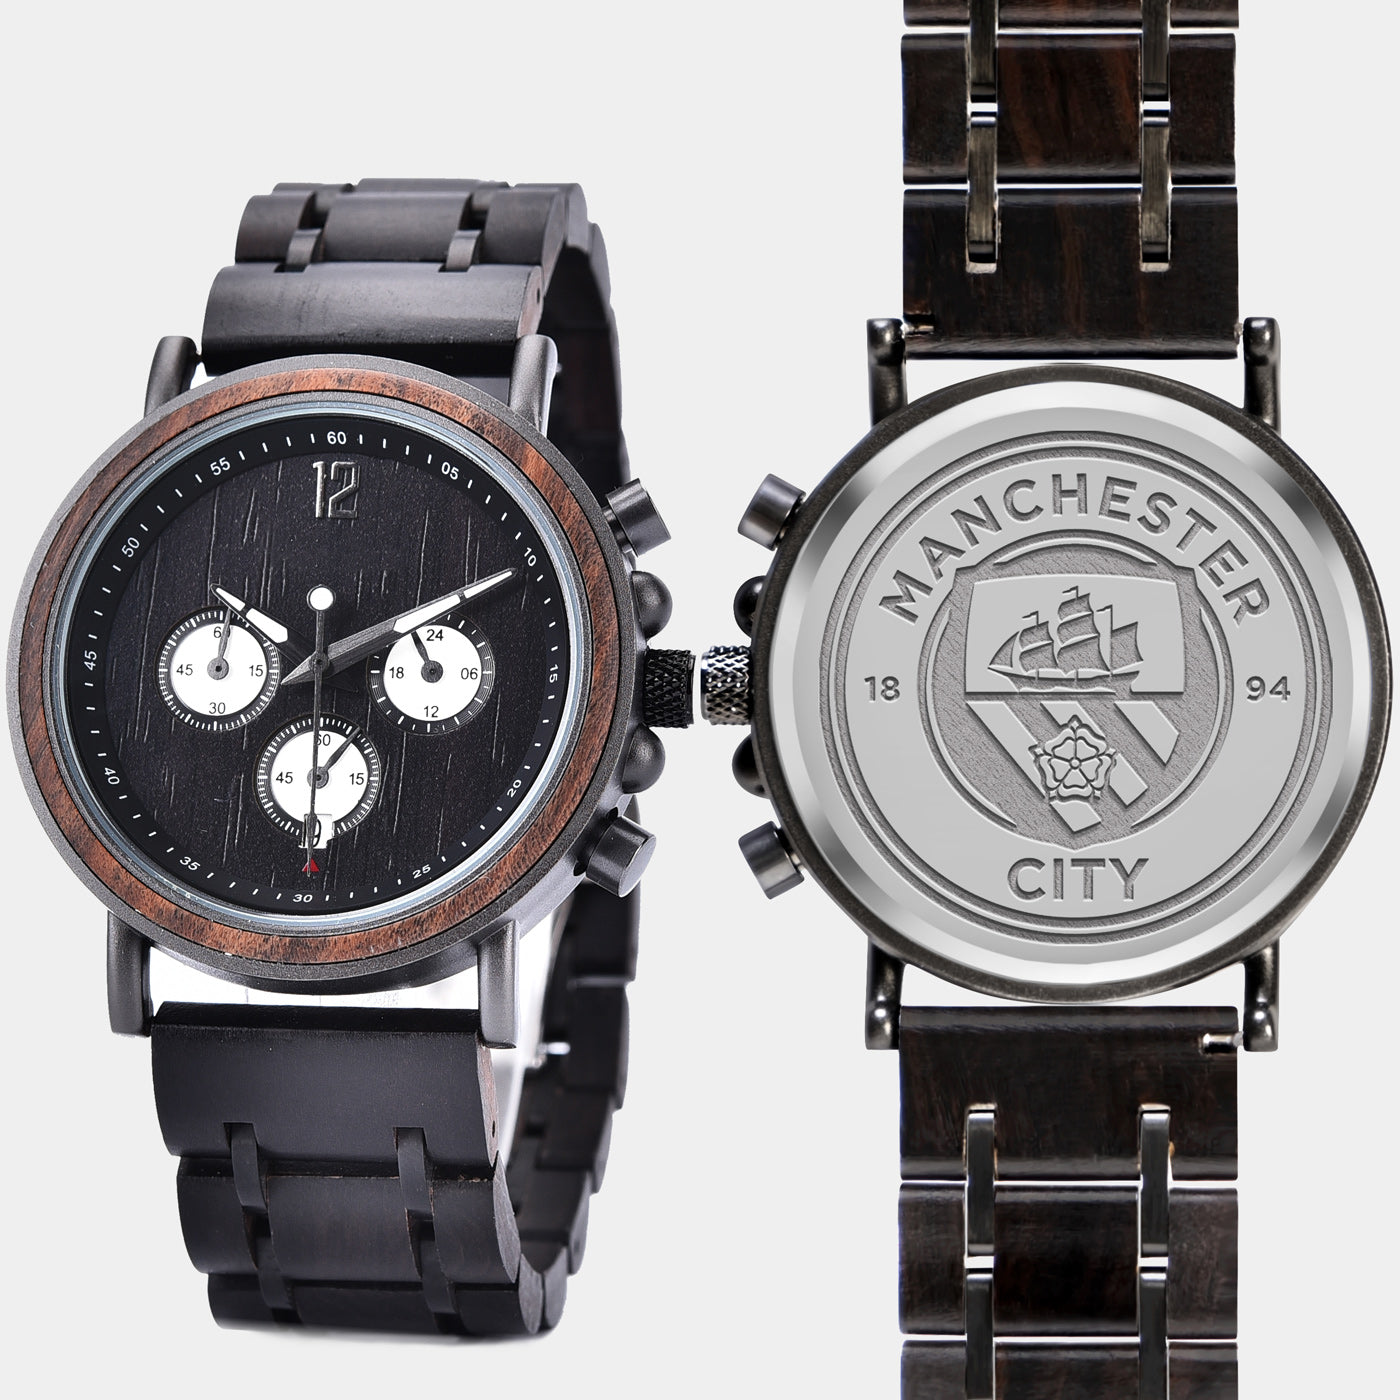 Manchester City F.C. Mens Wrist Watch  - Personalized Manchester City F.C. Mens Watches - Custom Gifts For Him, Birthday Gifts, Gift For Dad - Best 2022 Manchester City F.C. Christmas Gifts - Black 45mm FC Wood Watch - By Engraved In Nature